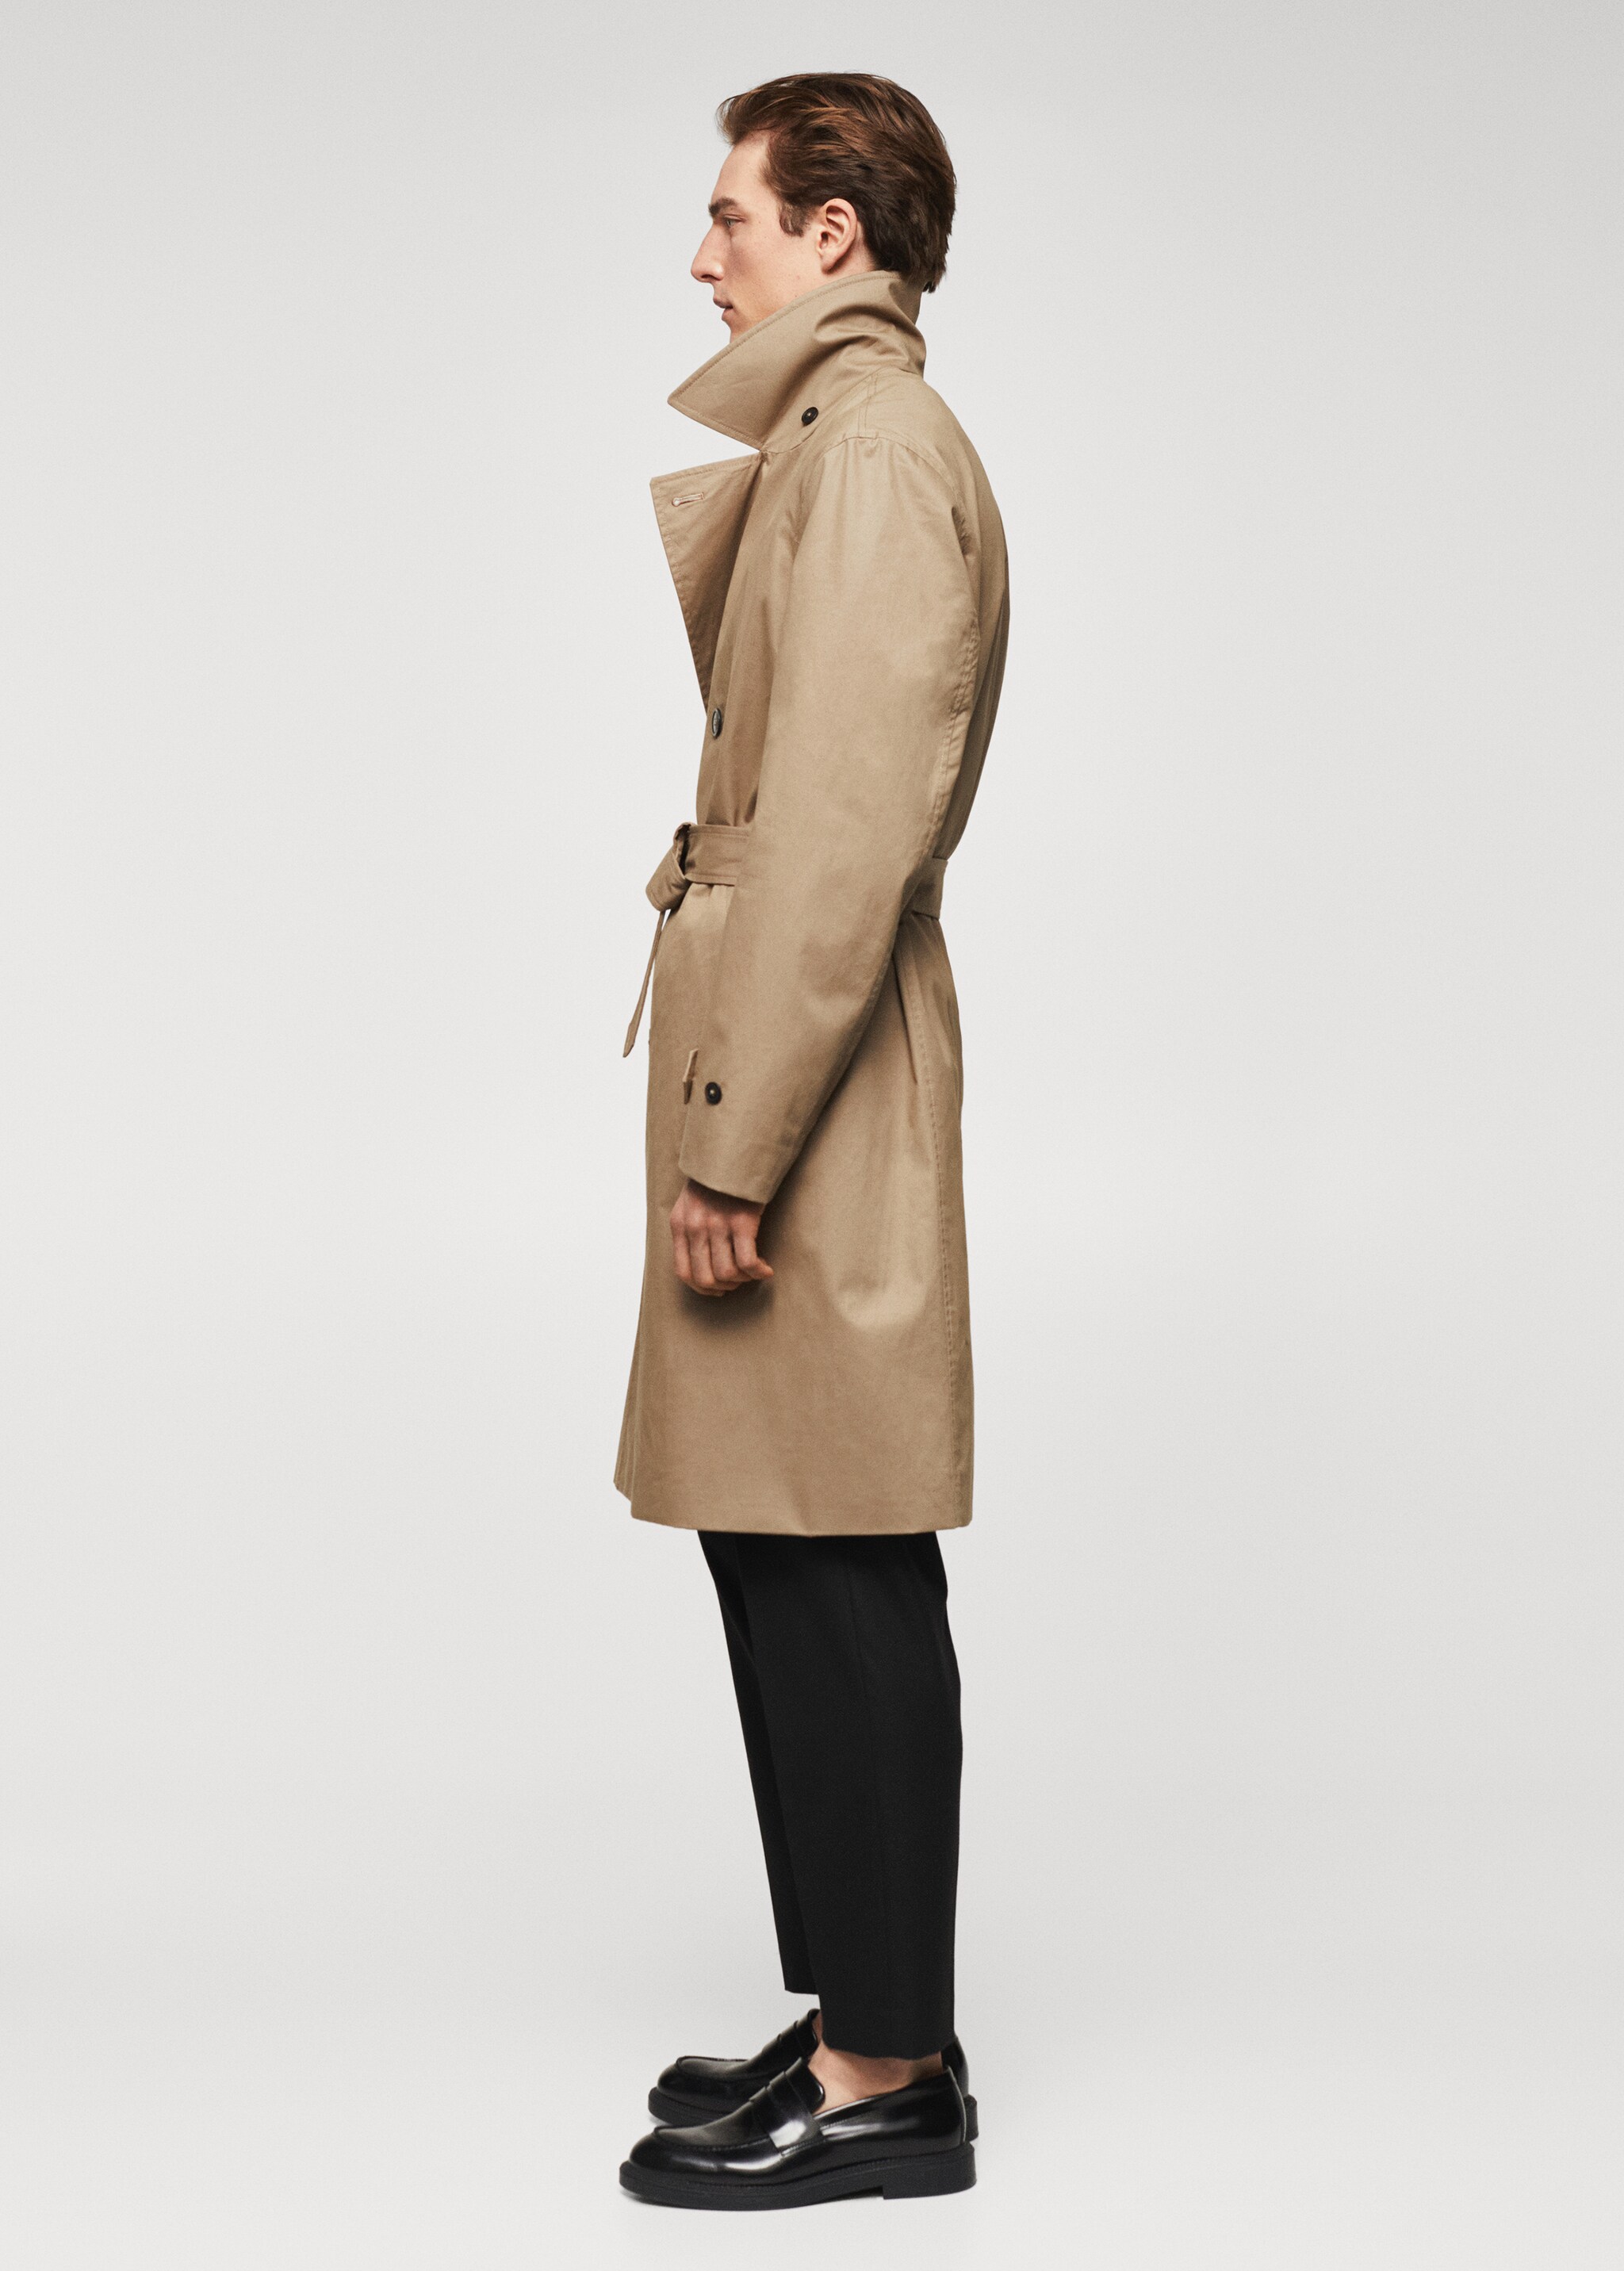 Classic 100% cotton trench coat - Details of the article 6